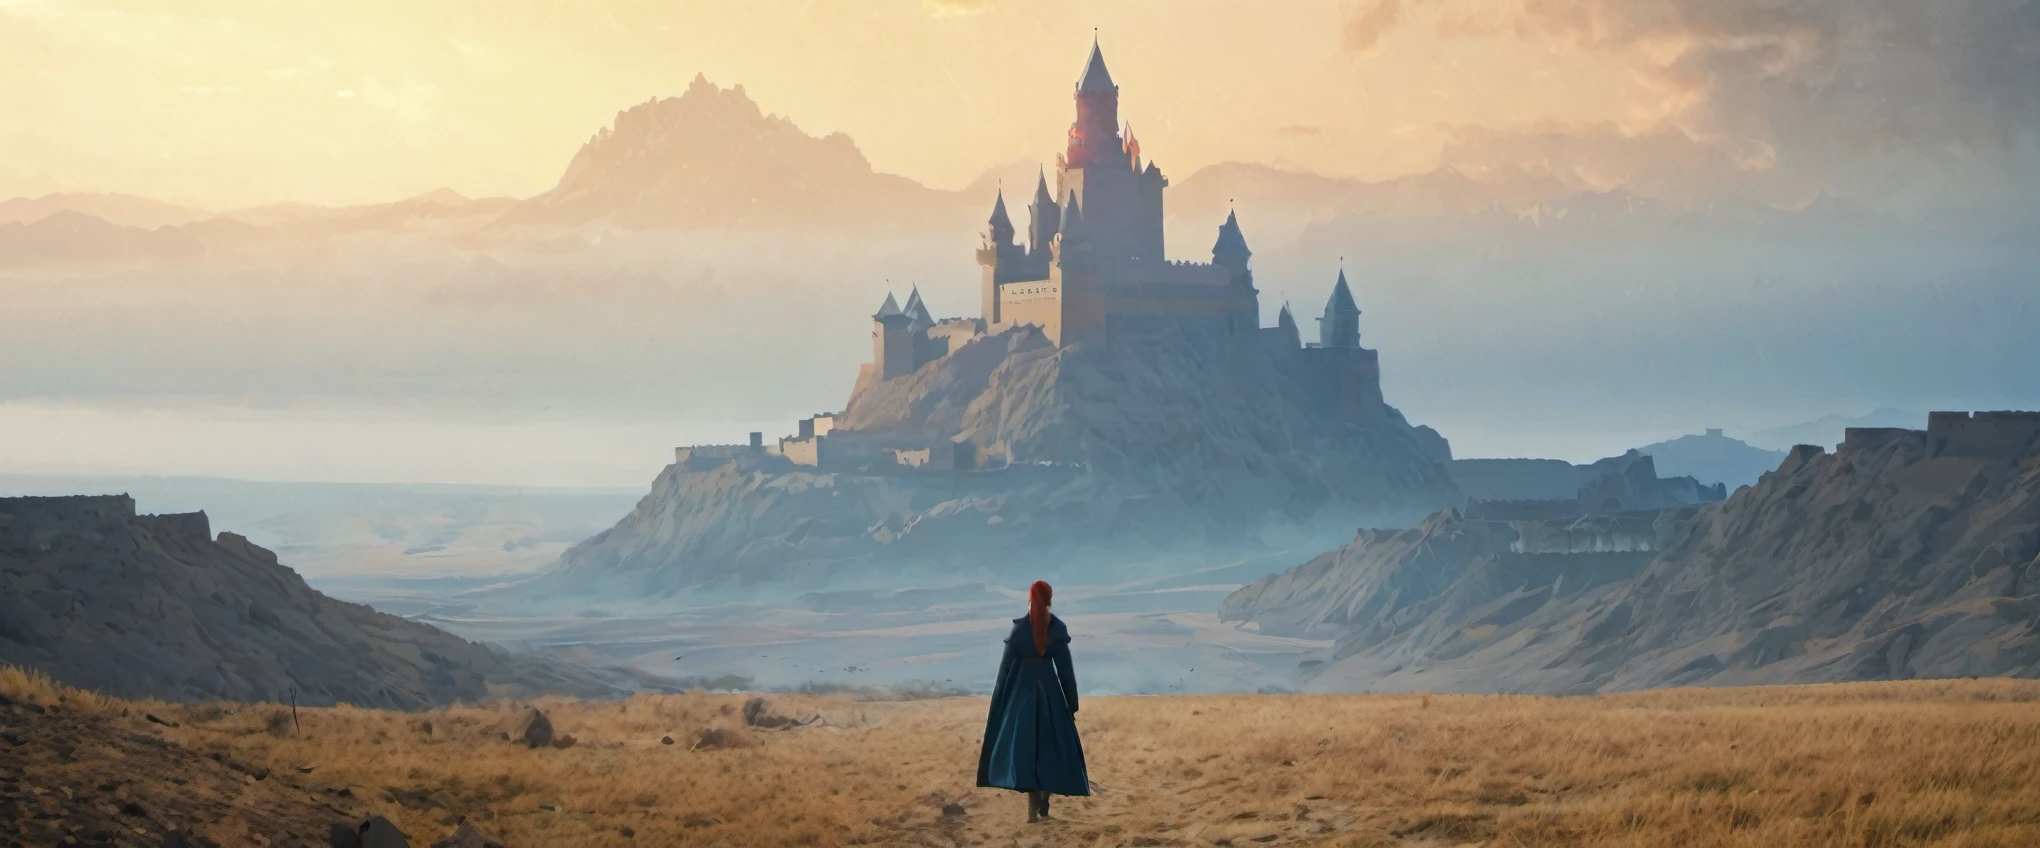 masterpiece, illustration, ((massive giant military babel fortress made of carving stone standing on desert land far away)), (babel tower), pale blue sky, sunlight, fog, shadow, dark grass with stone, uninhabitable, barren land, nature, (mountains), unsaturated, (young girl wearing dark blue coat walking towards the castle standing far away), medium length red hair, moscow, soviet union, (dark dragon with glowing red eyes flying on the sky above the fortress)